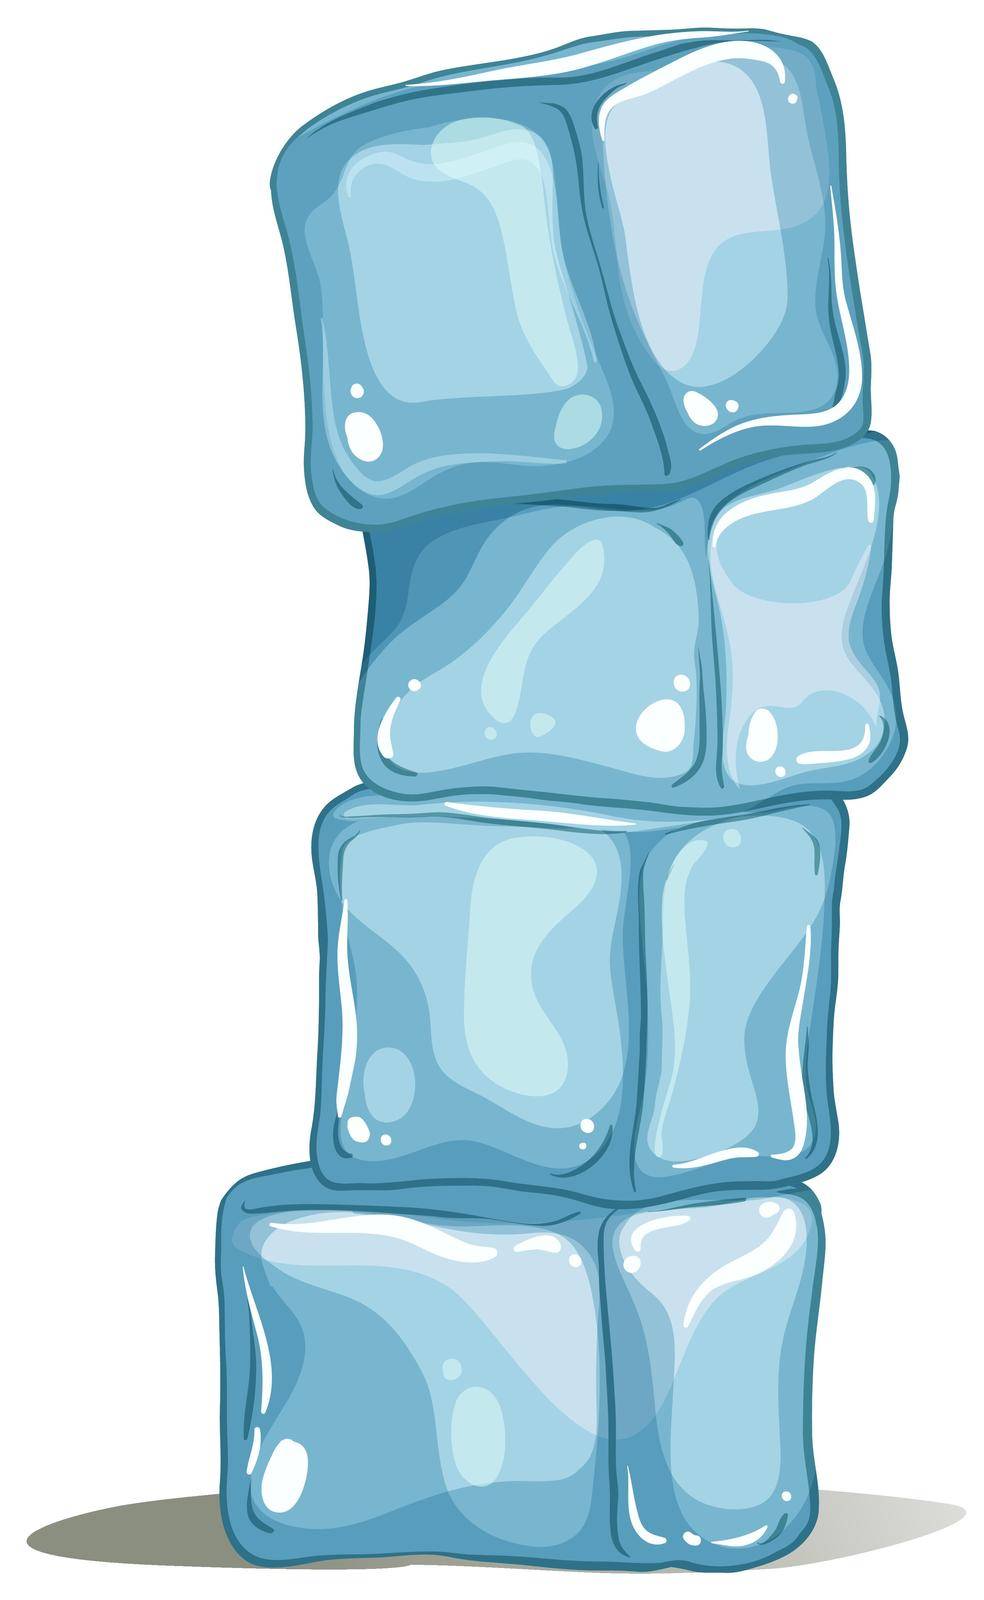 A pile of icecubes by iimages